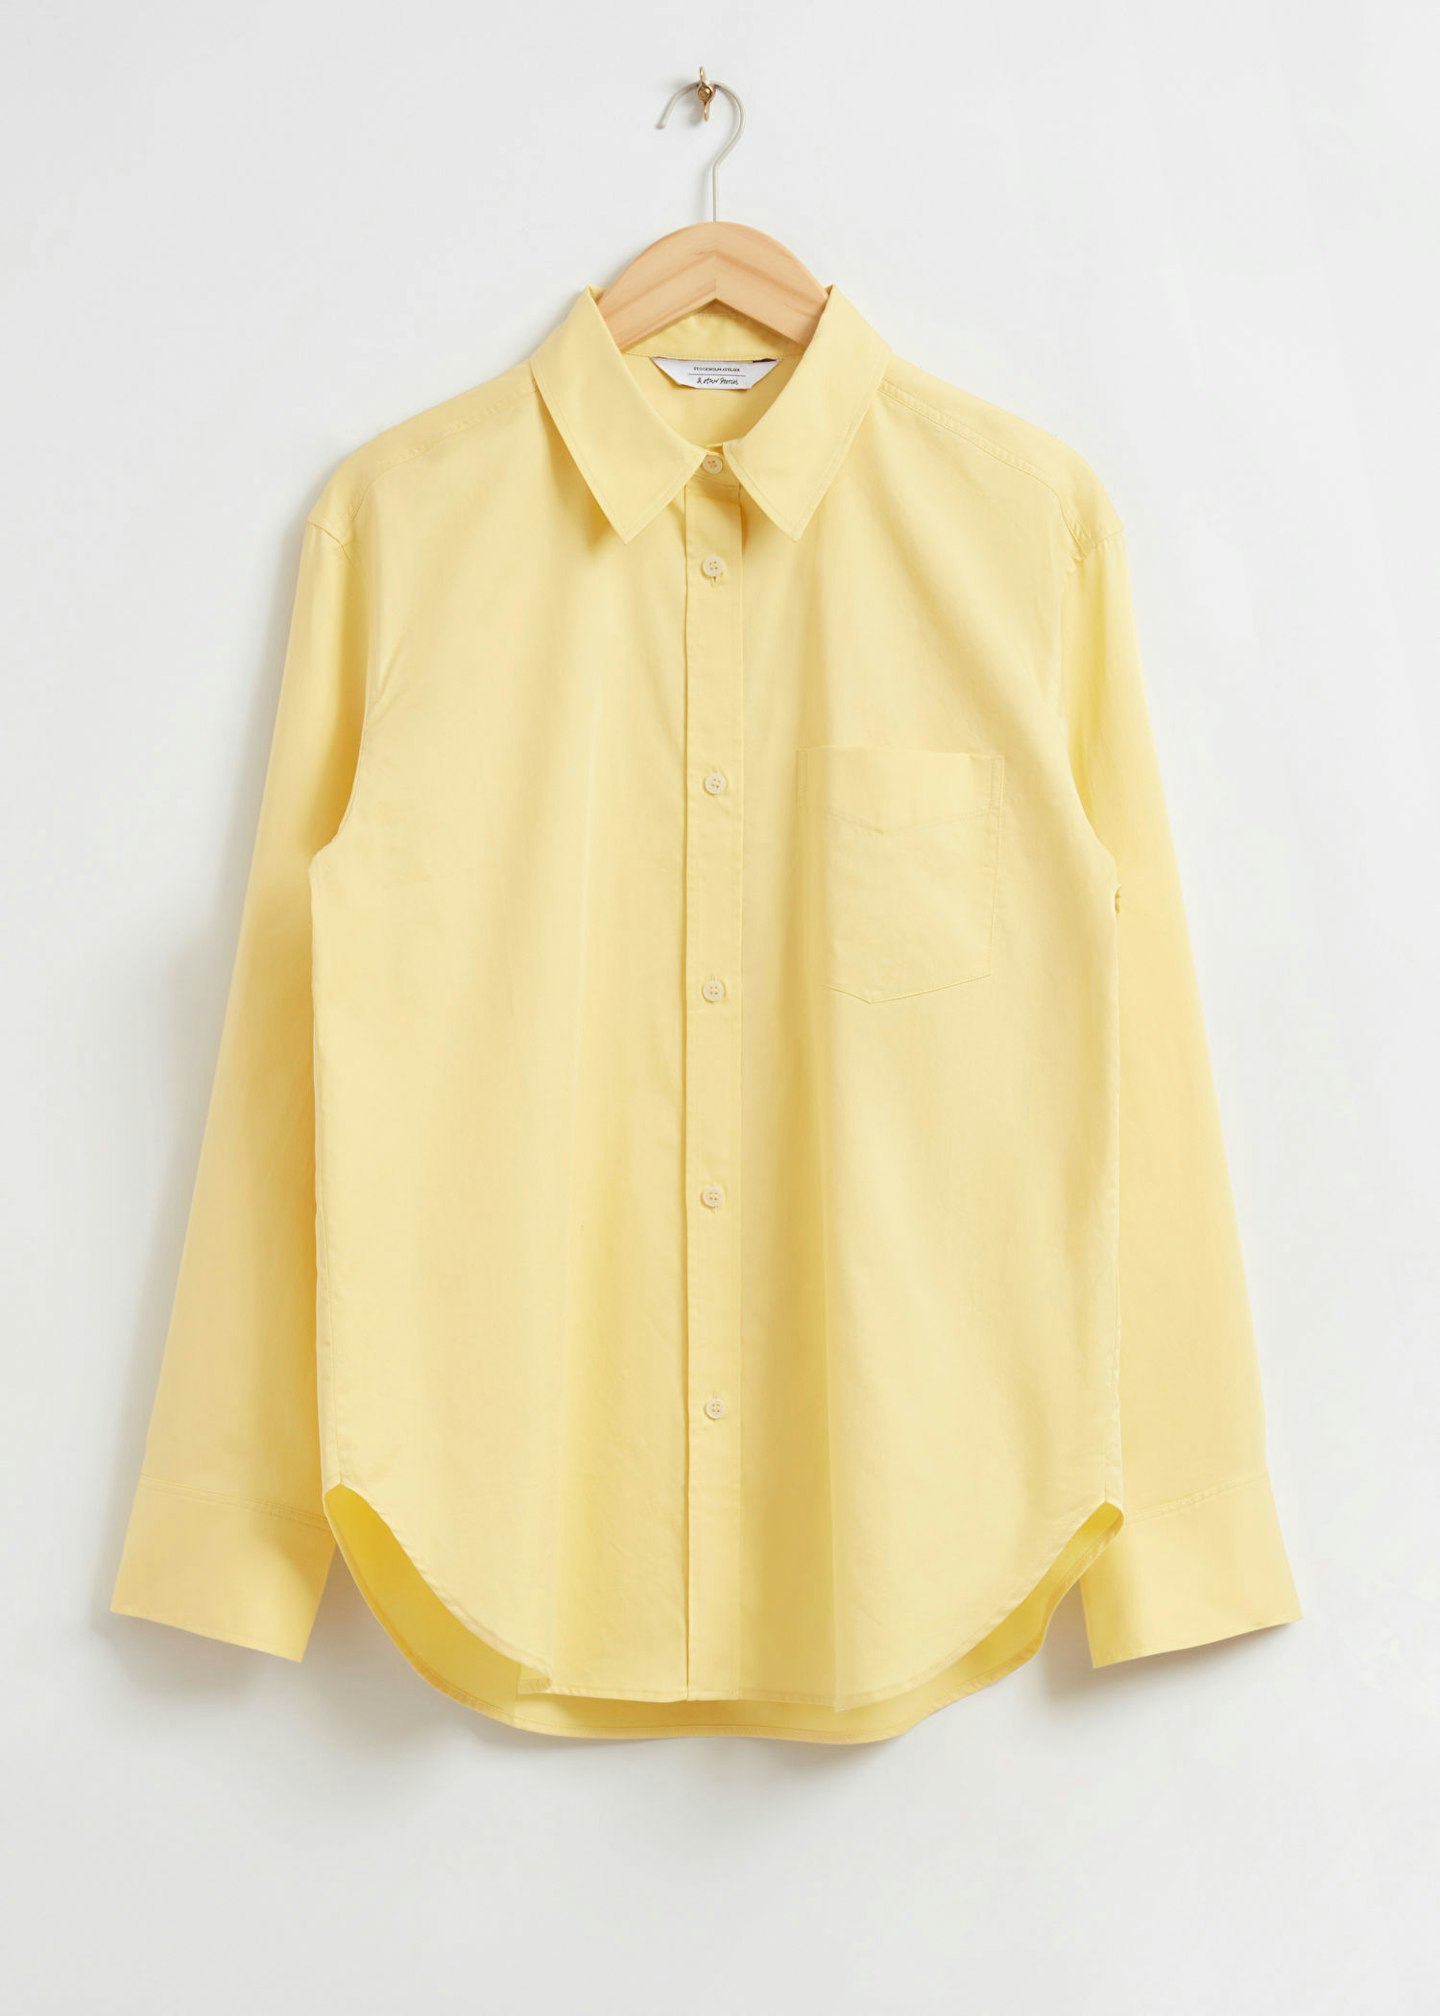 & Other Stories, Relaxed Fit Shirt